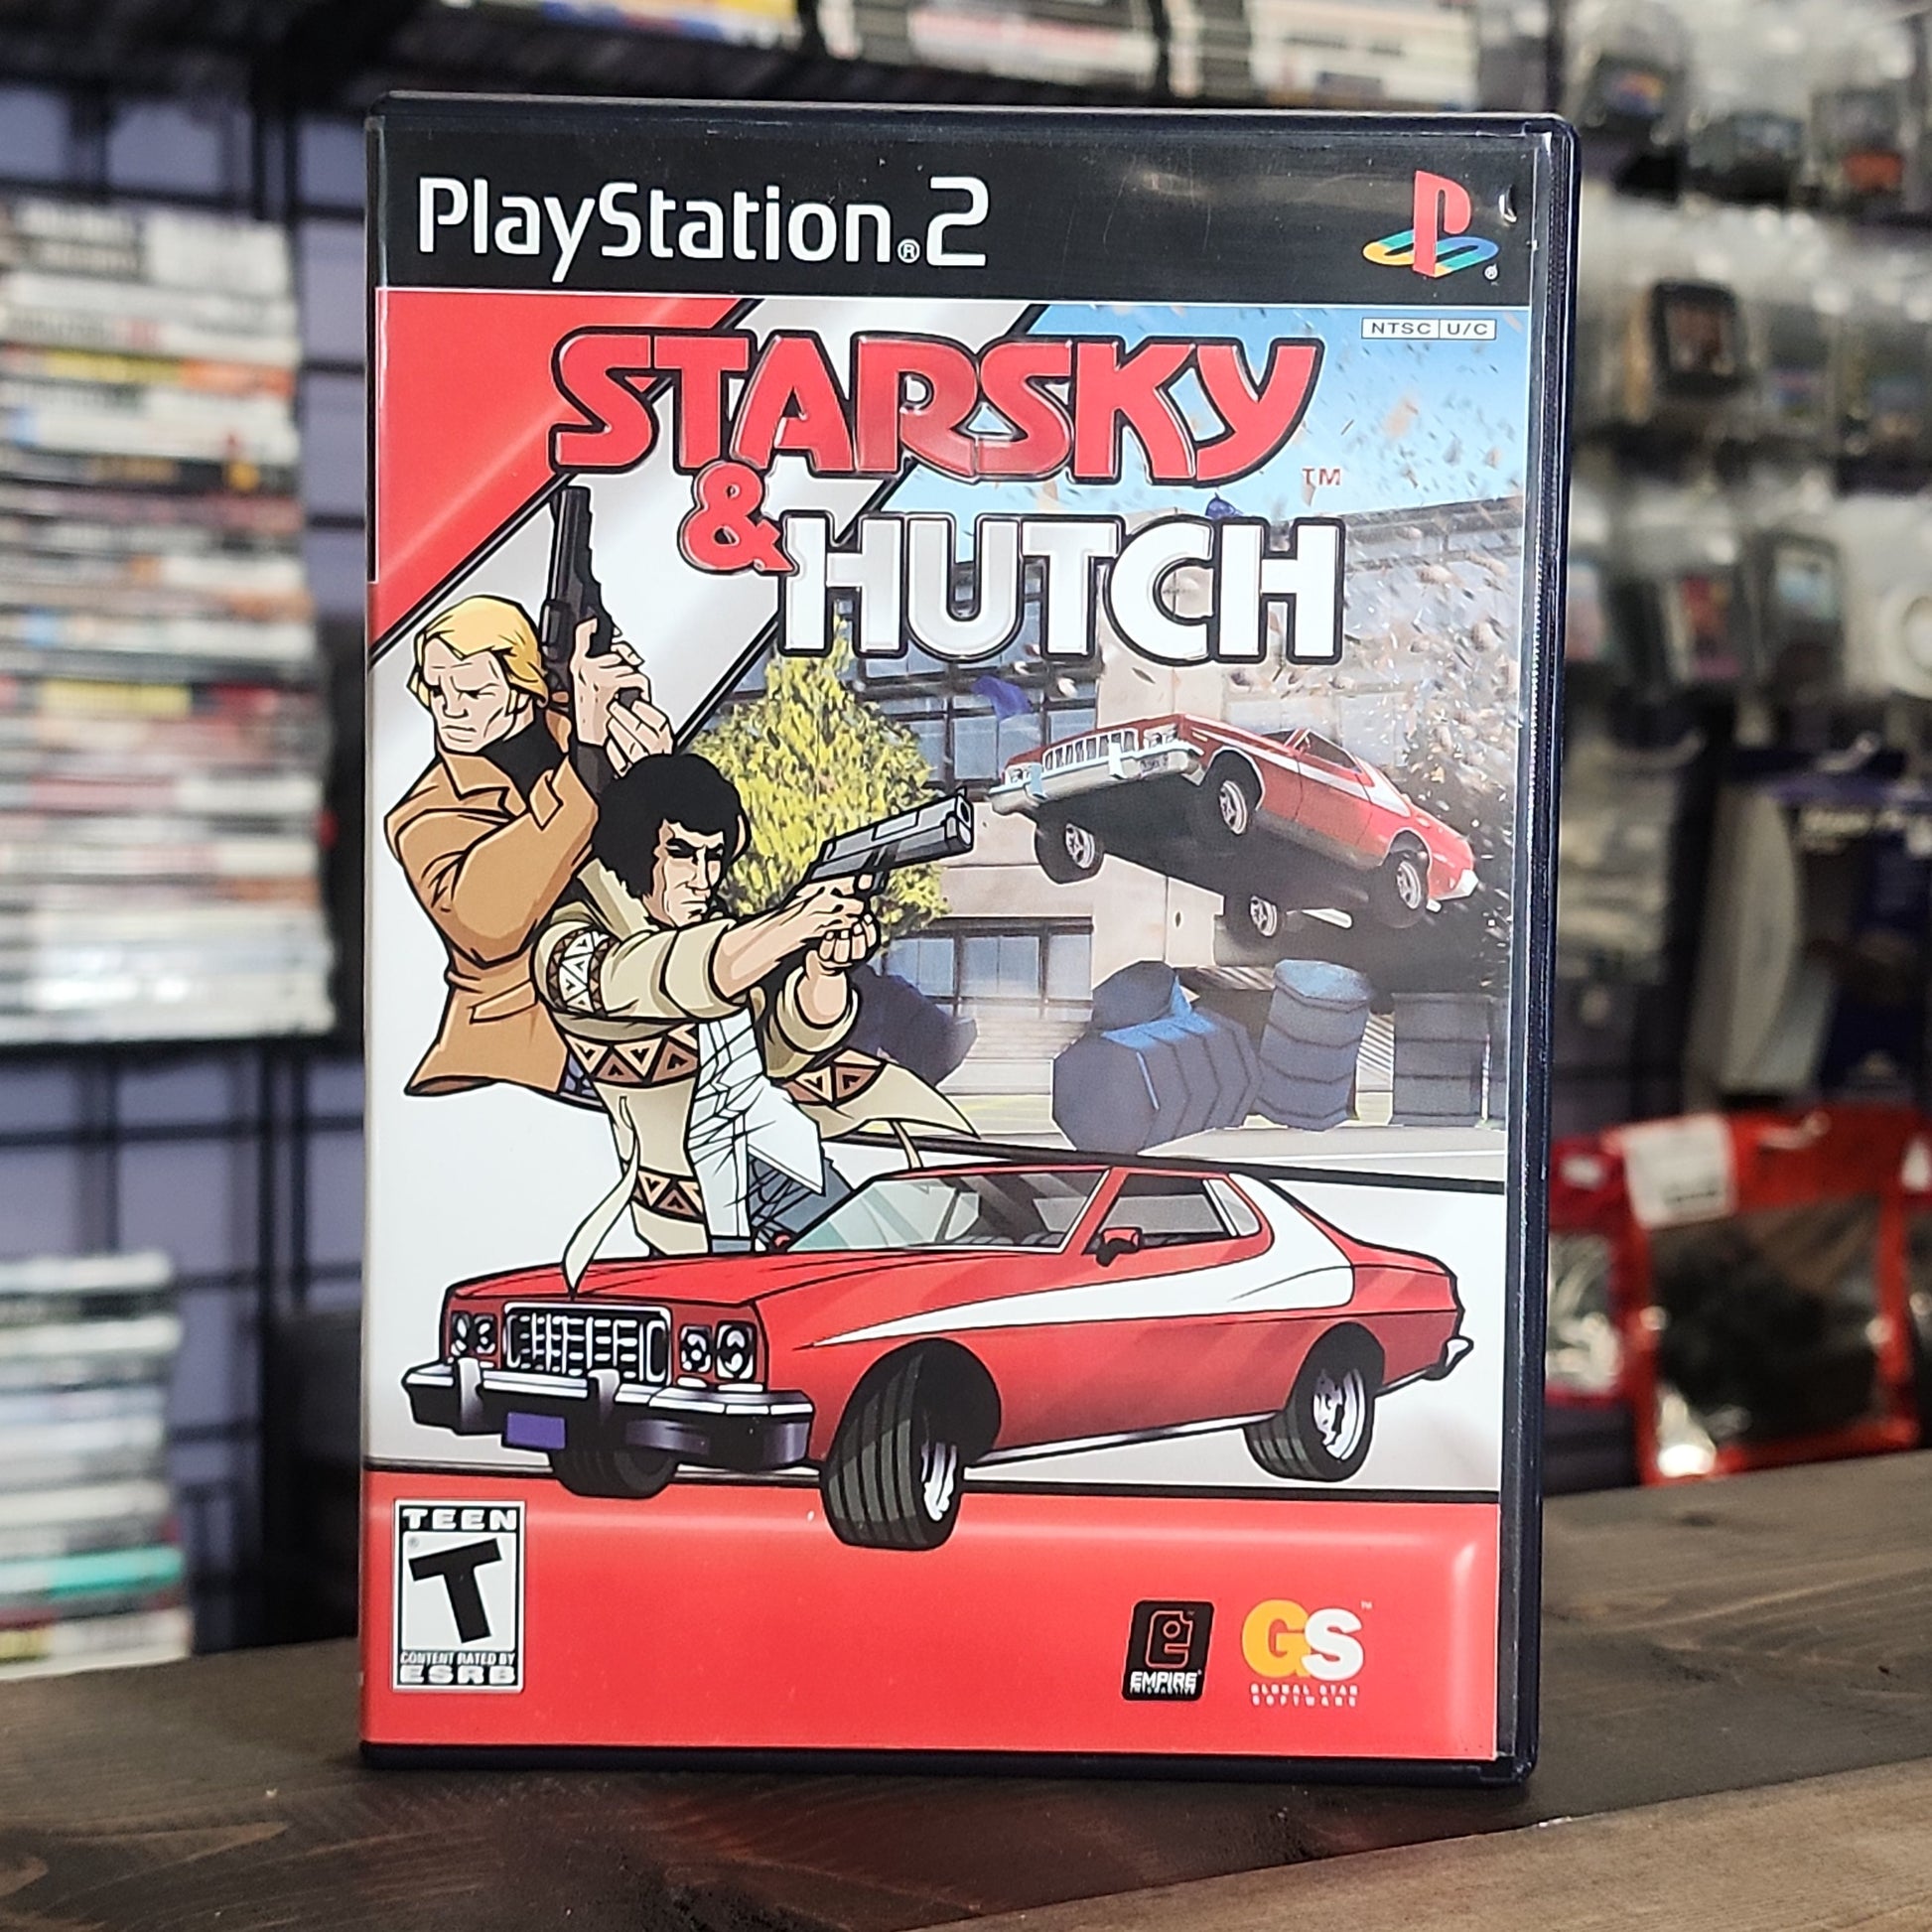 Playstation 2 - Starsky & Hutch Retrograde Collectibles CIB, Gotham Games, Playstation 2, PS2, Racing, Supersonic Software, T Rated, TV Tie-In Preowned Video Game 